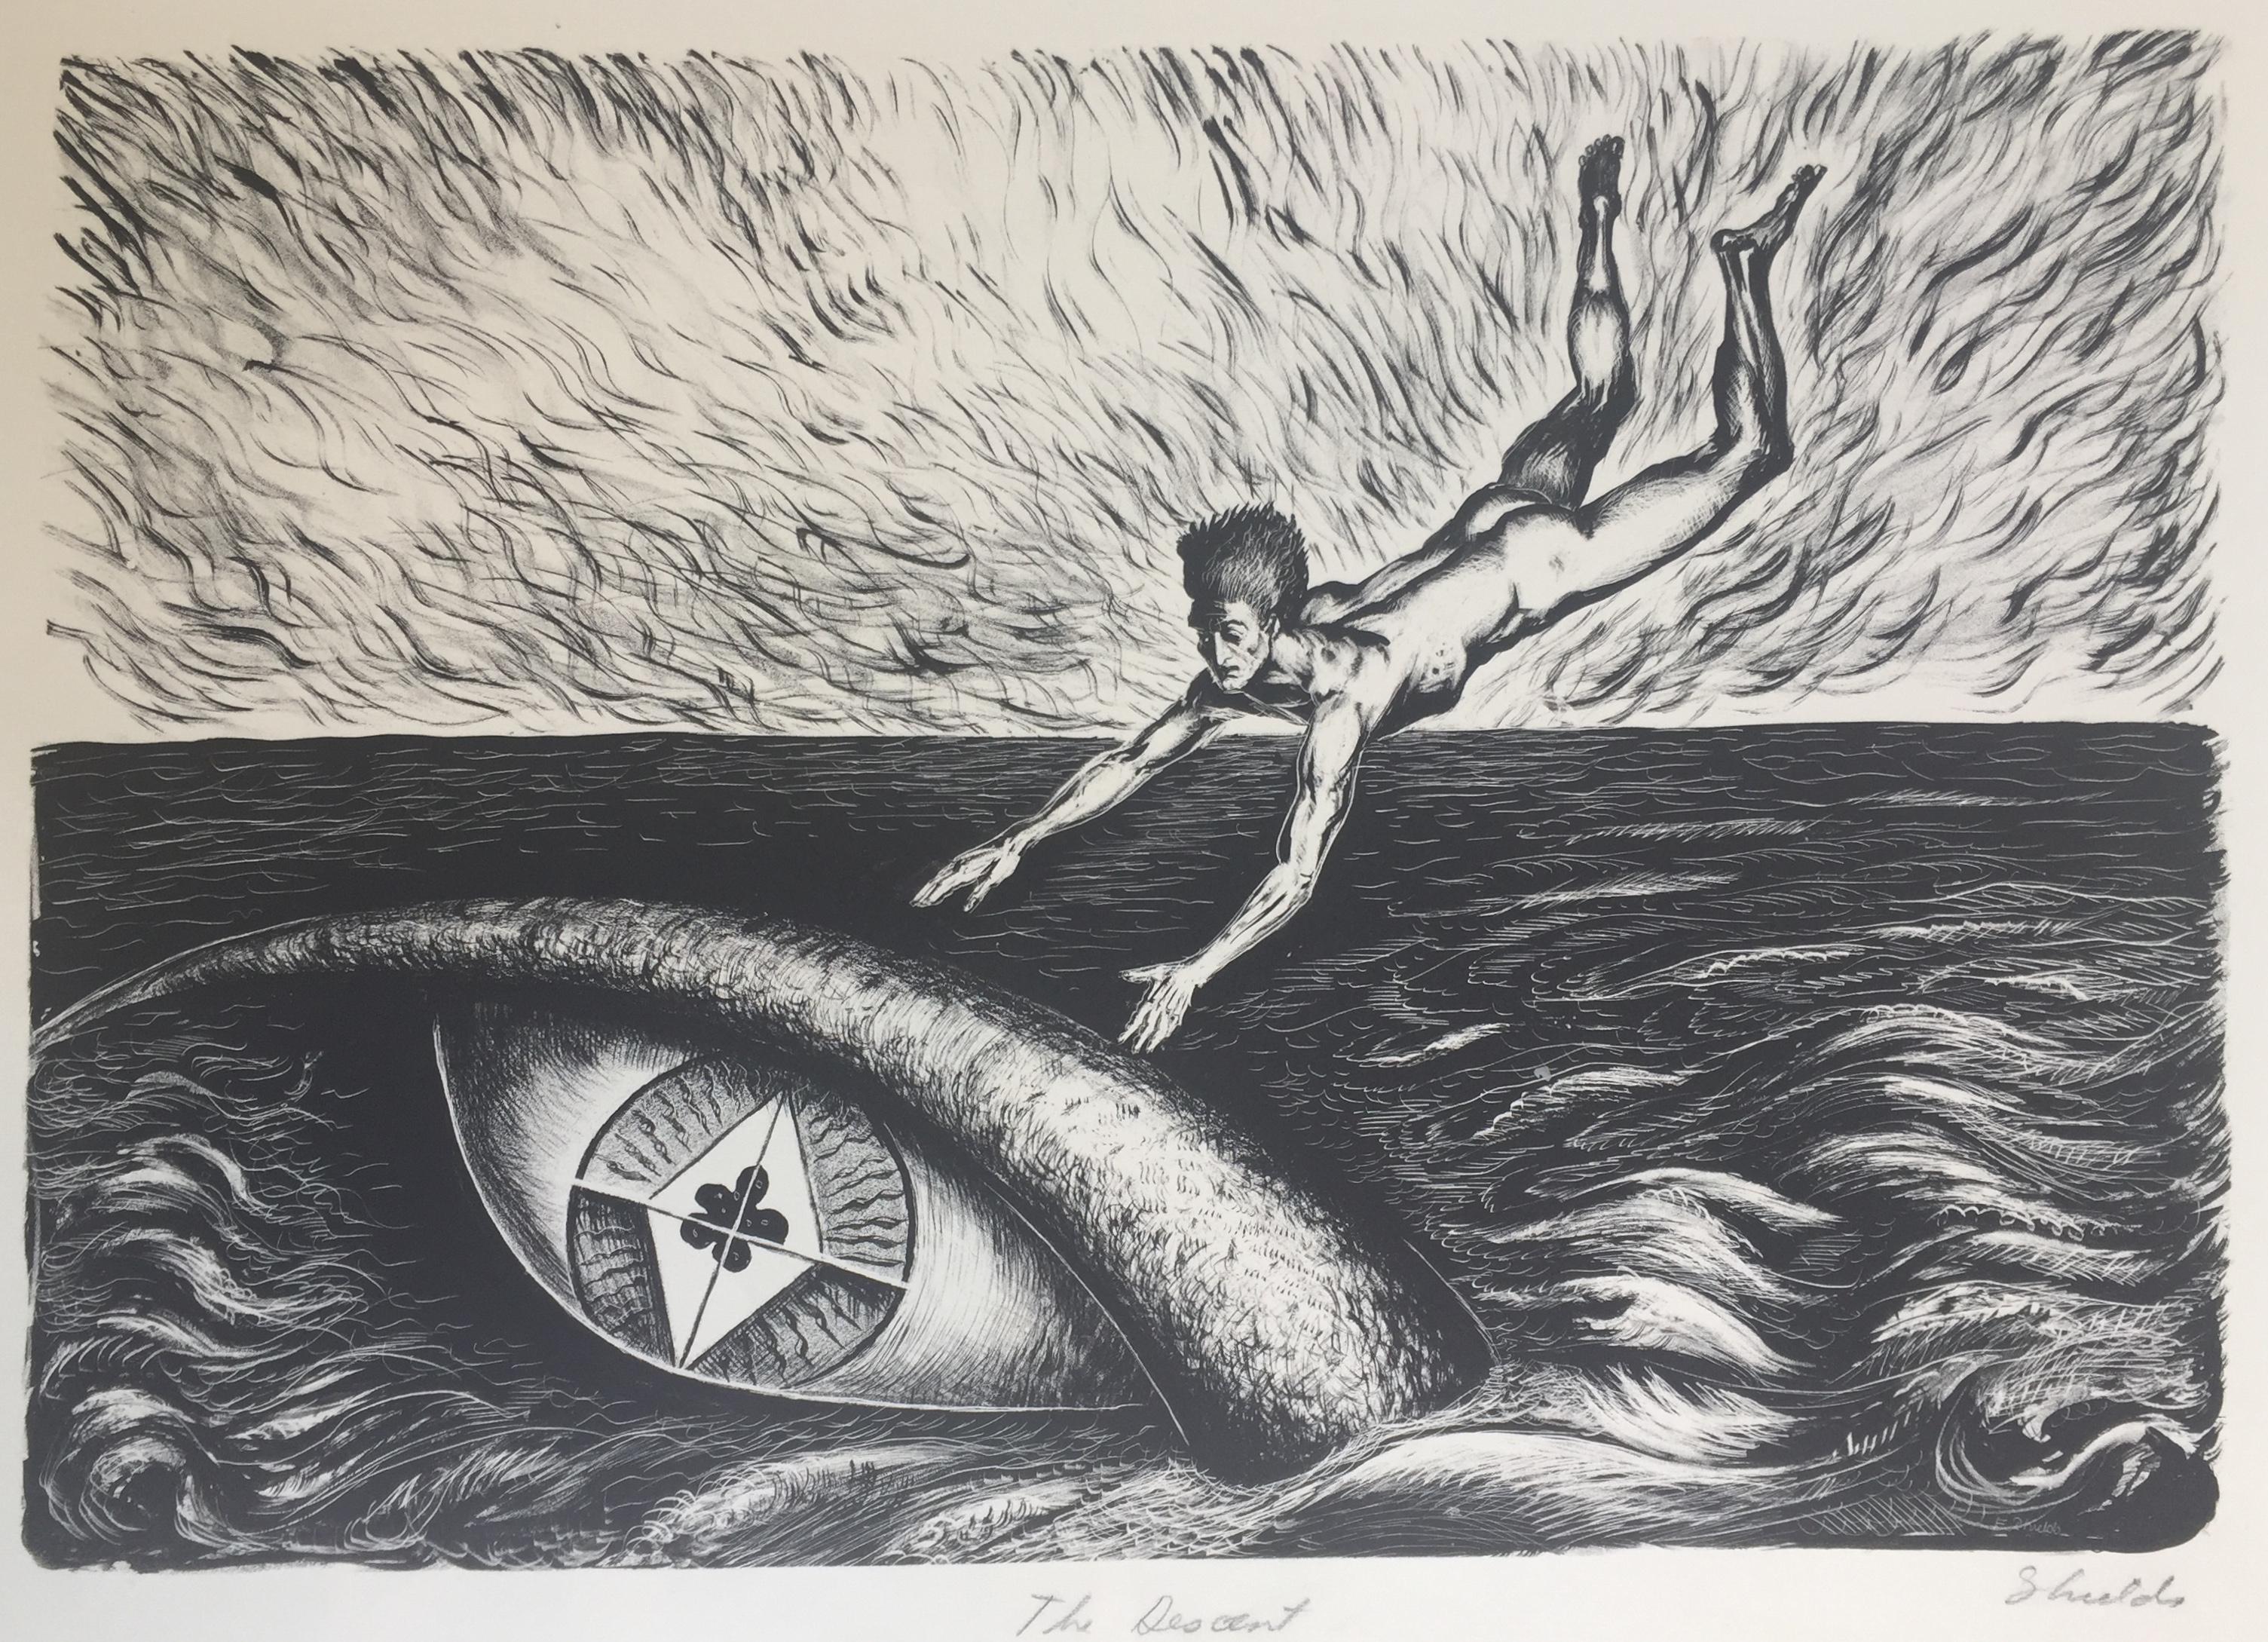 Francis Shields Landscape Print - The Decent  (Published by the WPA/Federal Arts Project)